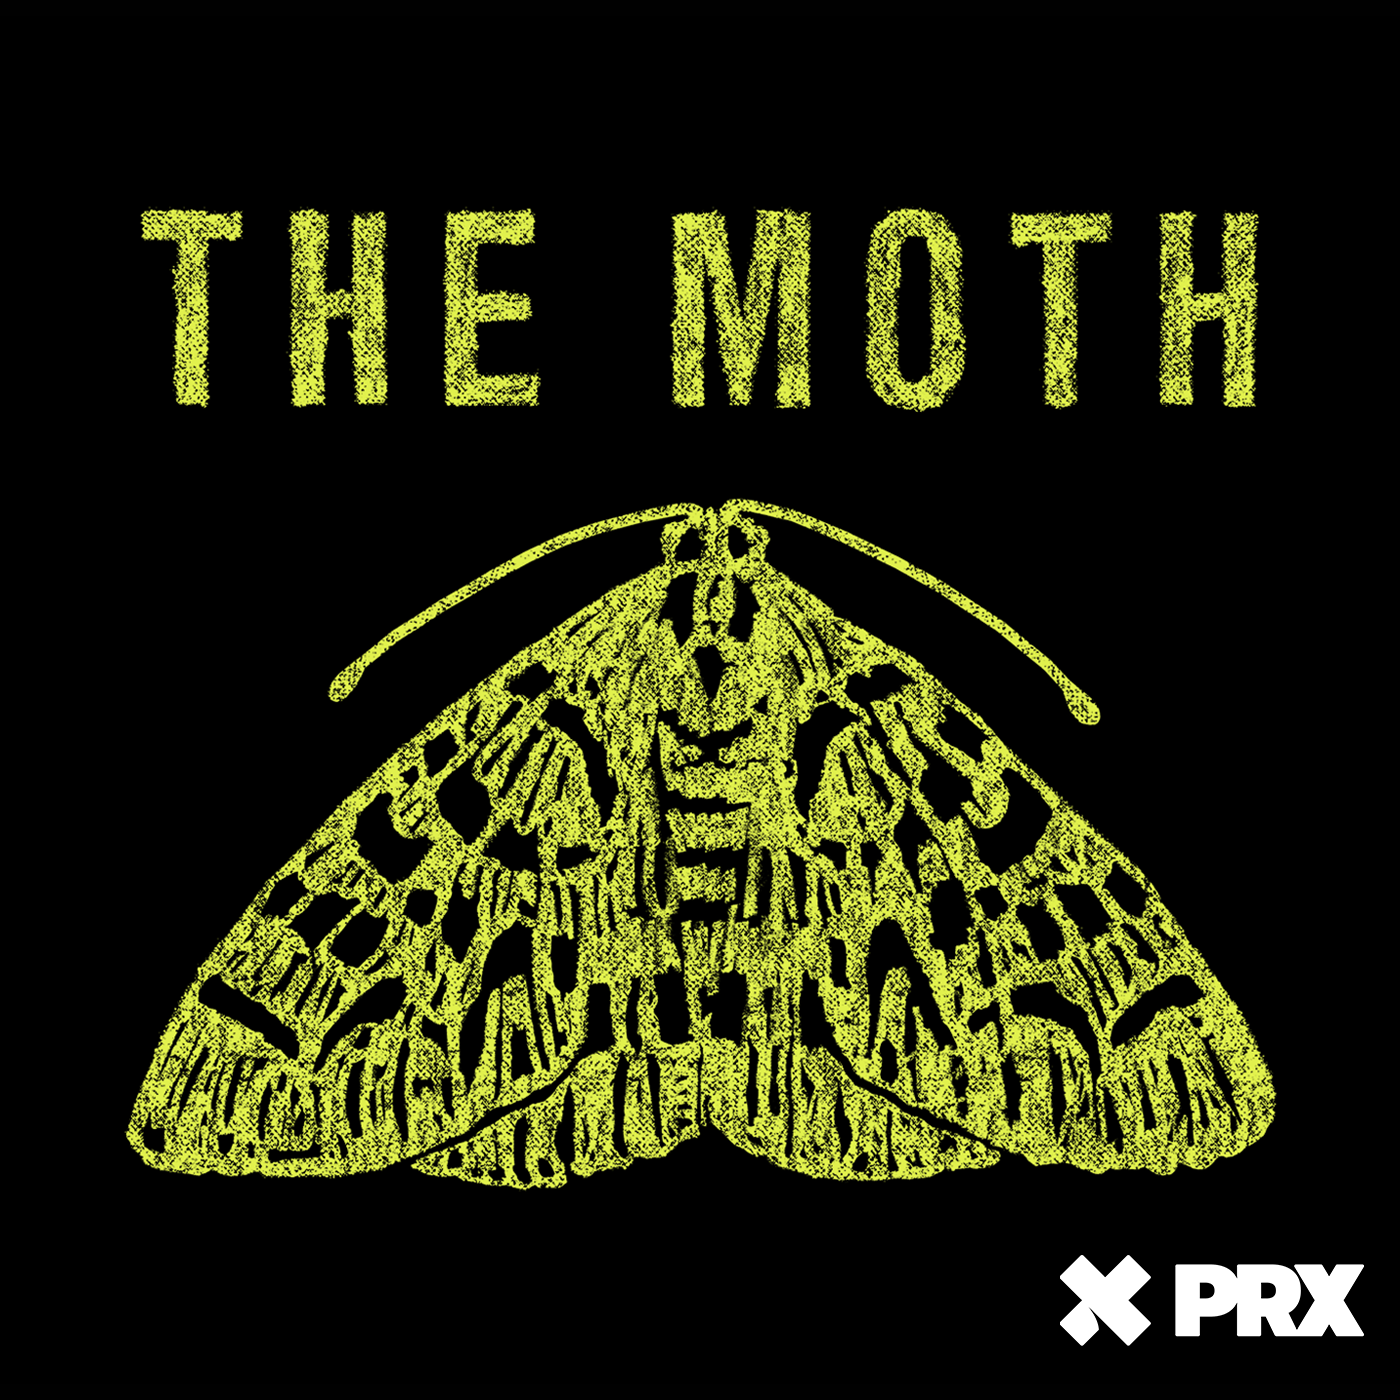 The Moth Radio Hour: After the Fall